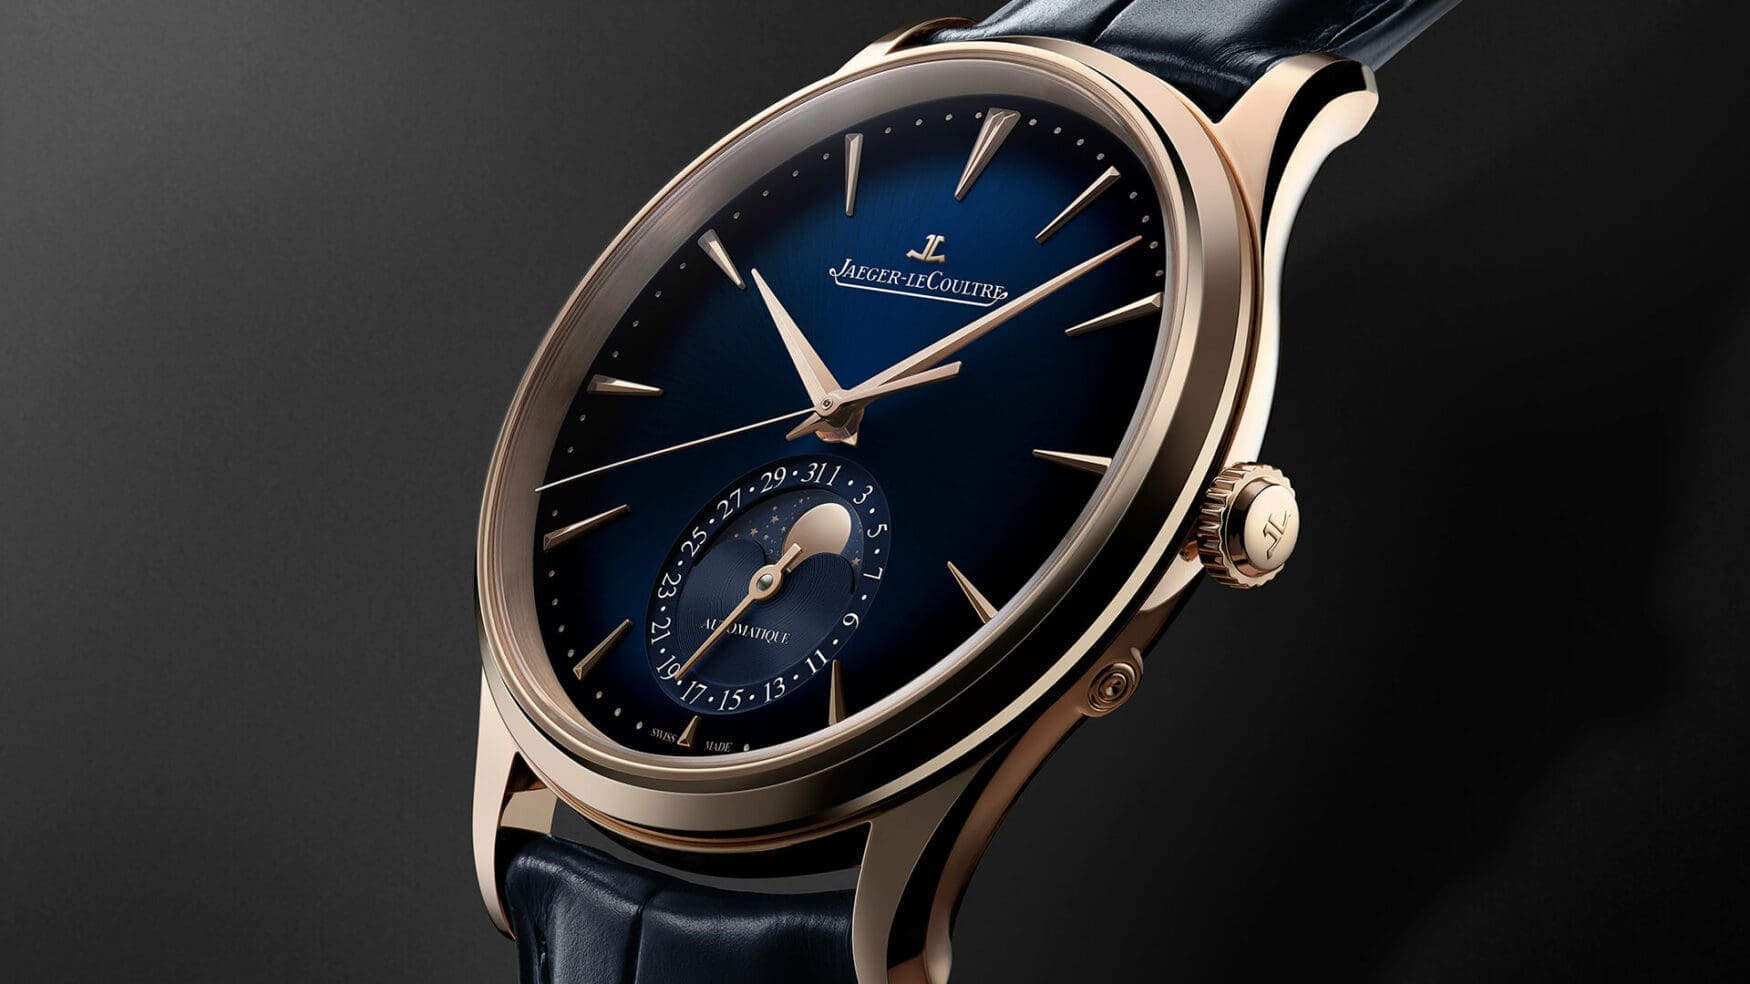 The Jaeger-LeCoultre Master Ultra Thin Moon brings the cool in a deep, jazzy blue